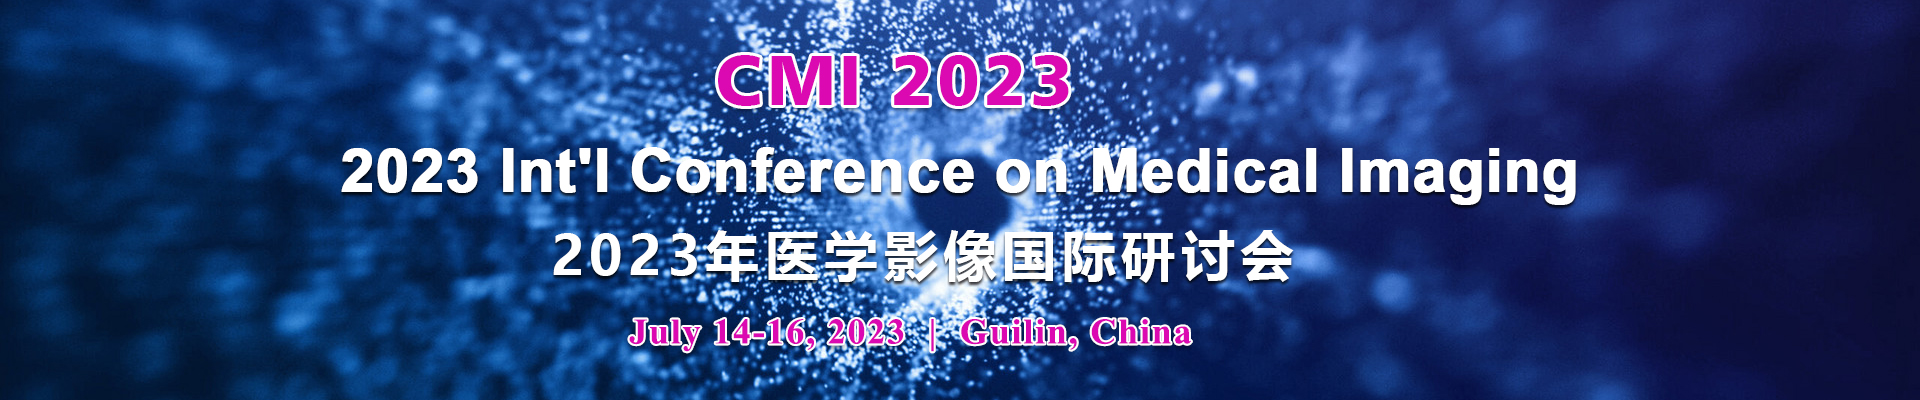 2023 Int'l Conference on Medical Imaging (CMI 2023), Guilin, Guangxi, China